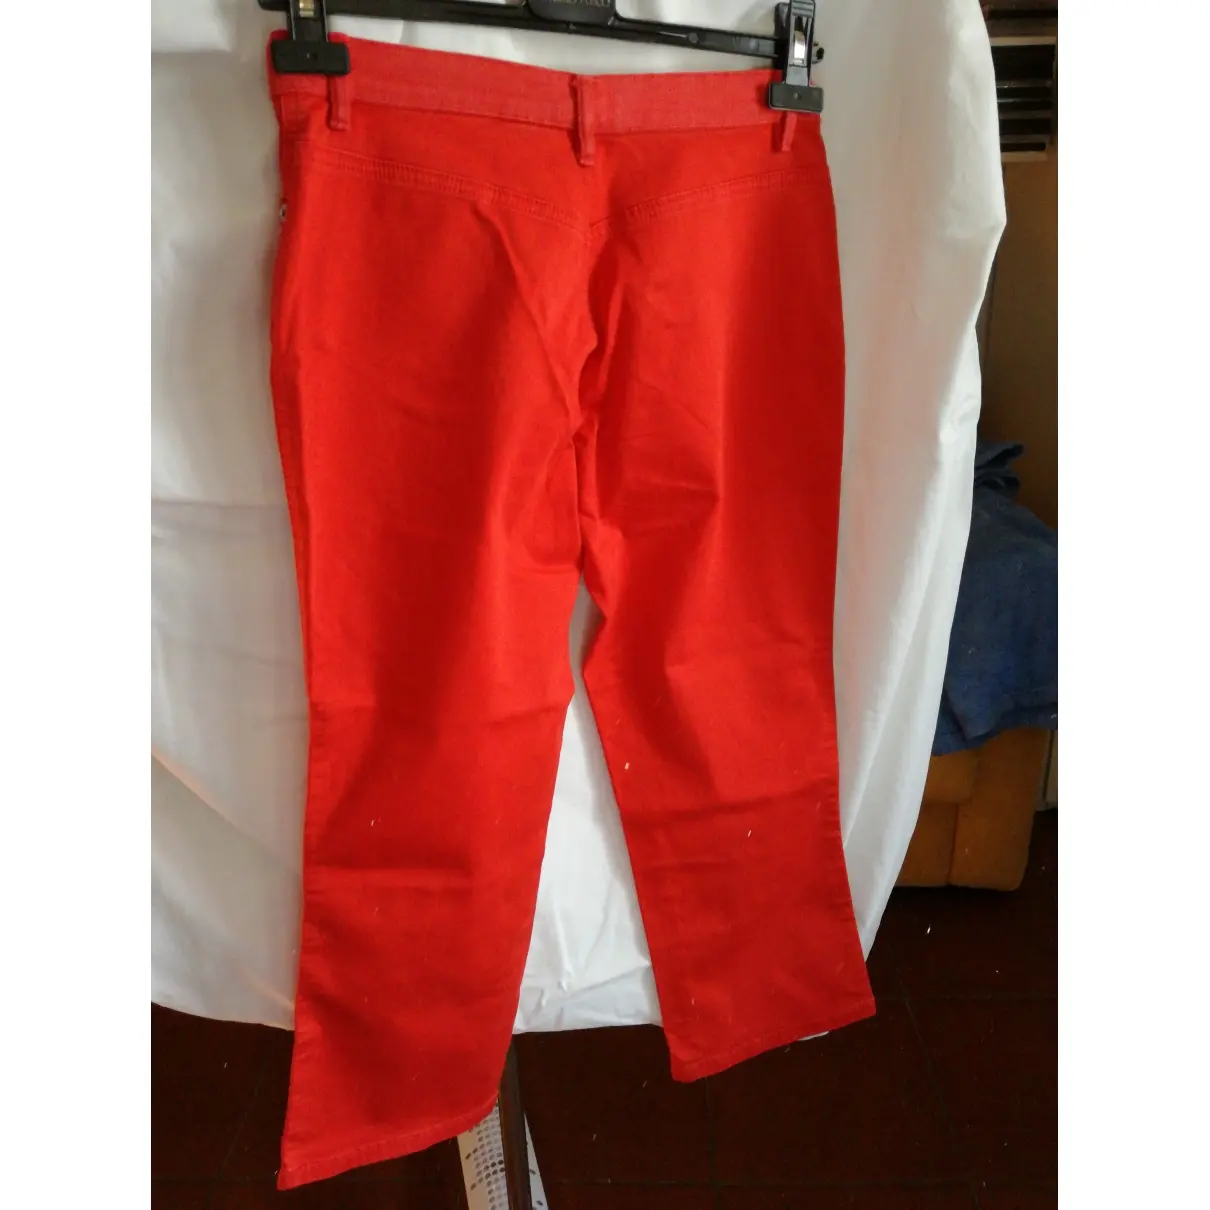 Dkny Short jeans for sale